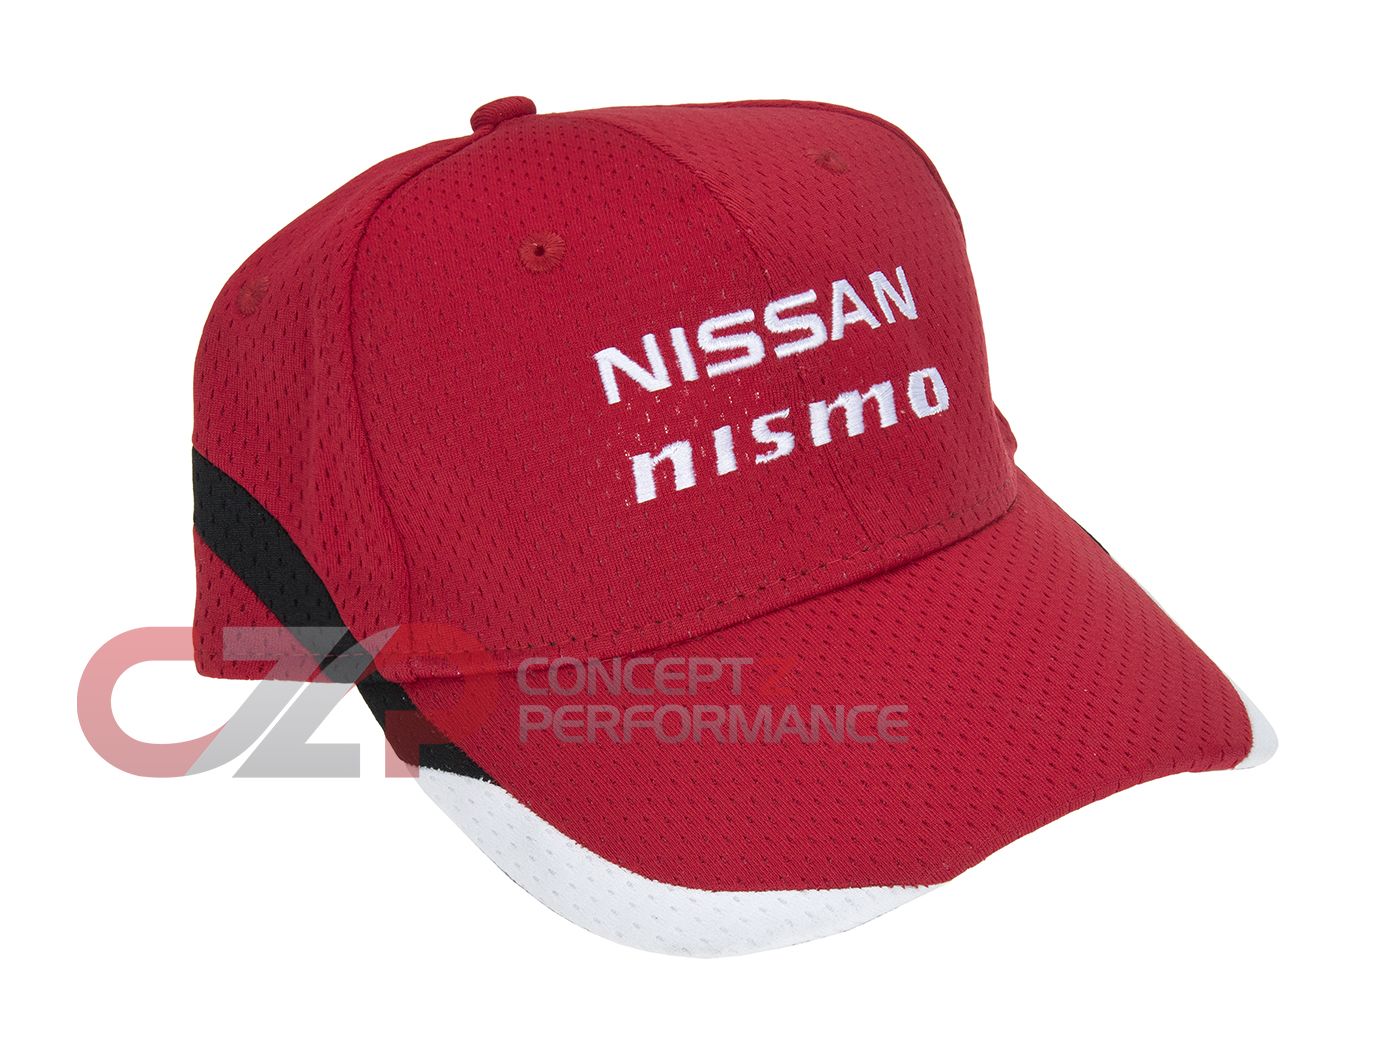 Nissan Nismo Snap-Back Cap - Red, Black, White